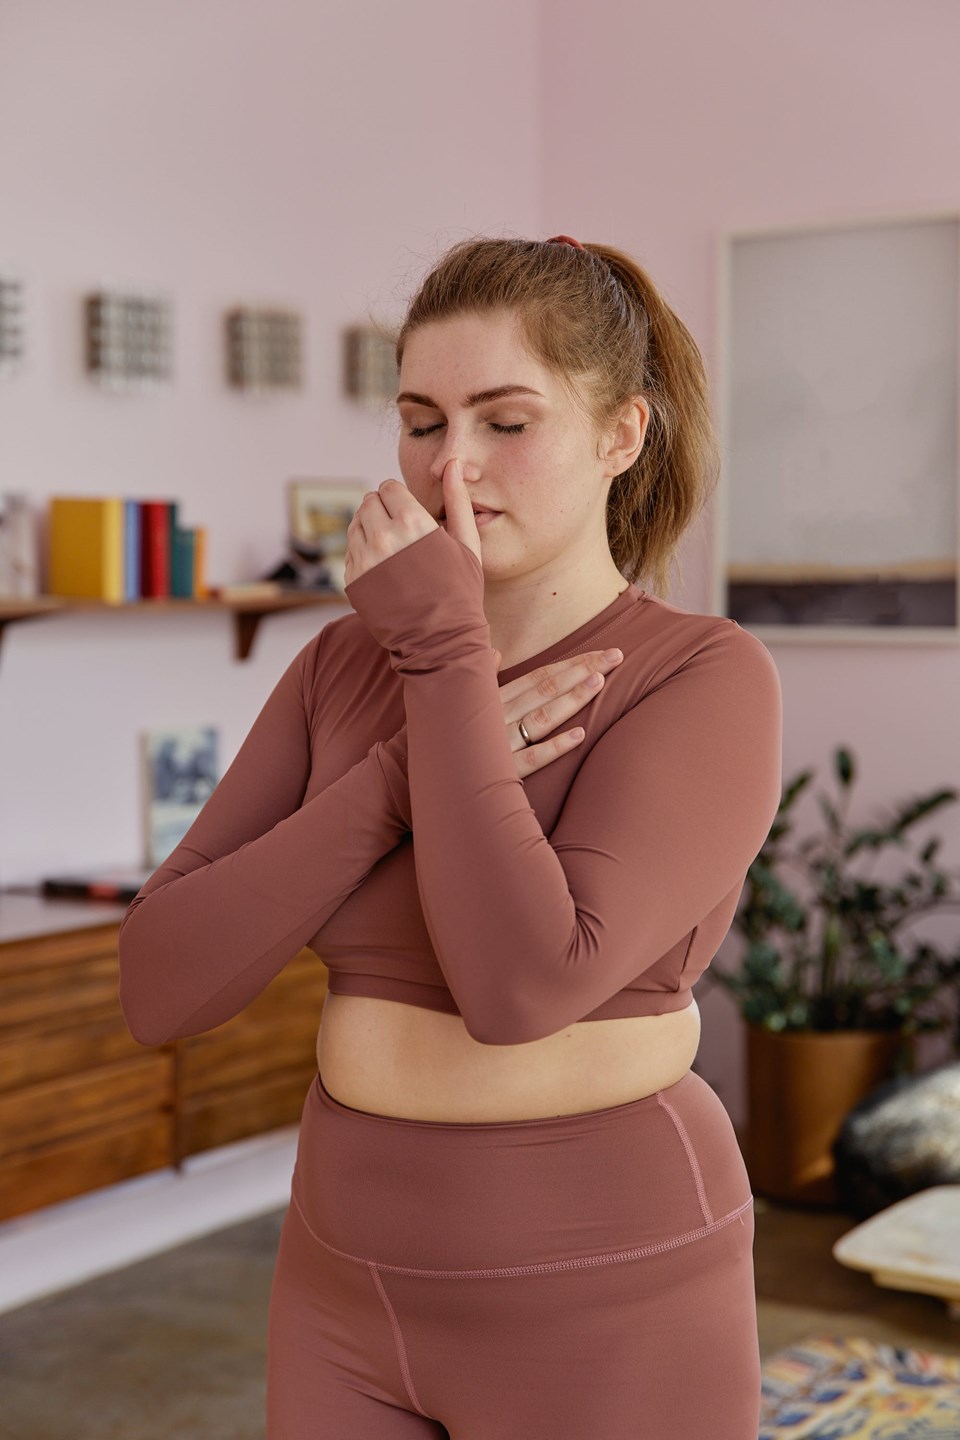 Yoga breathing exercise for colds